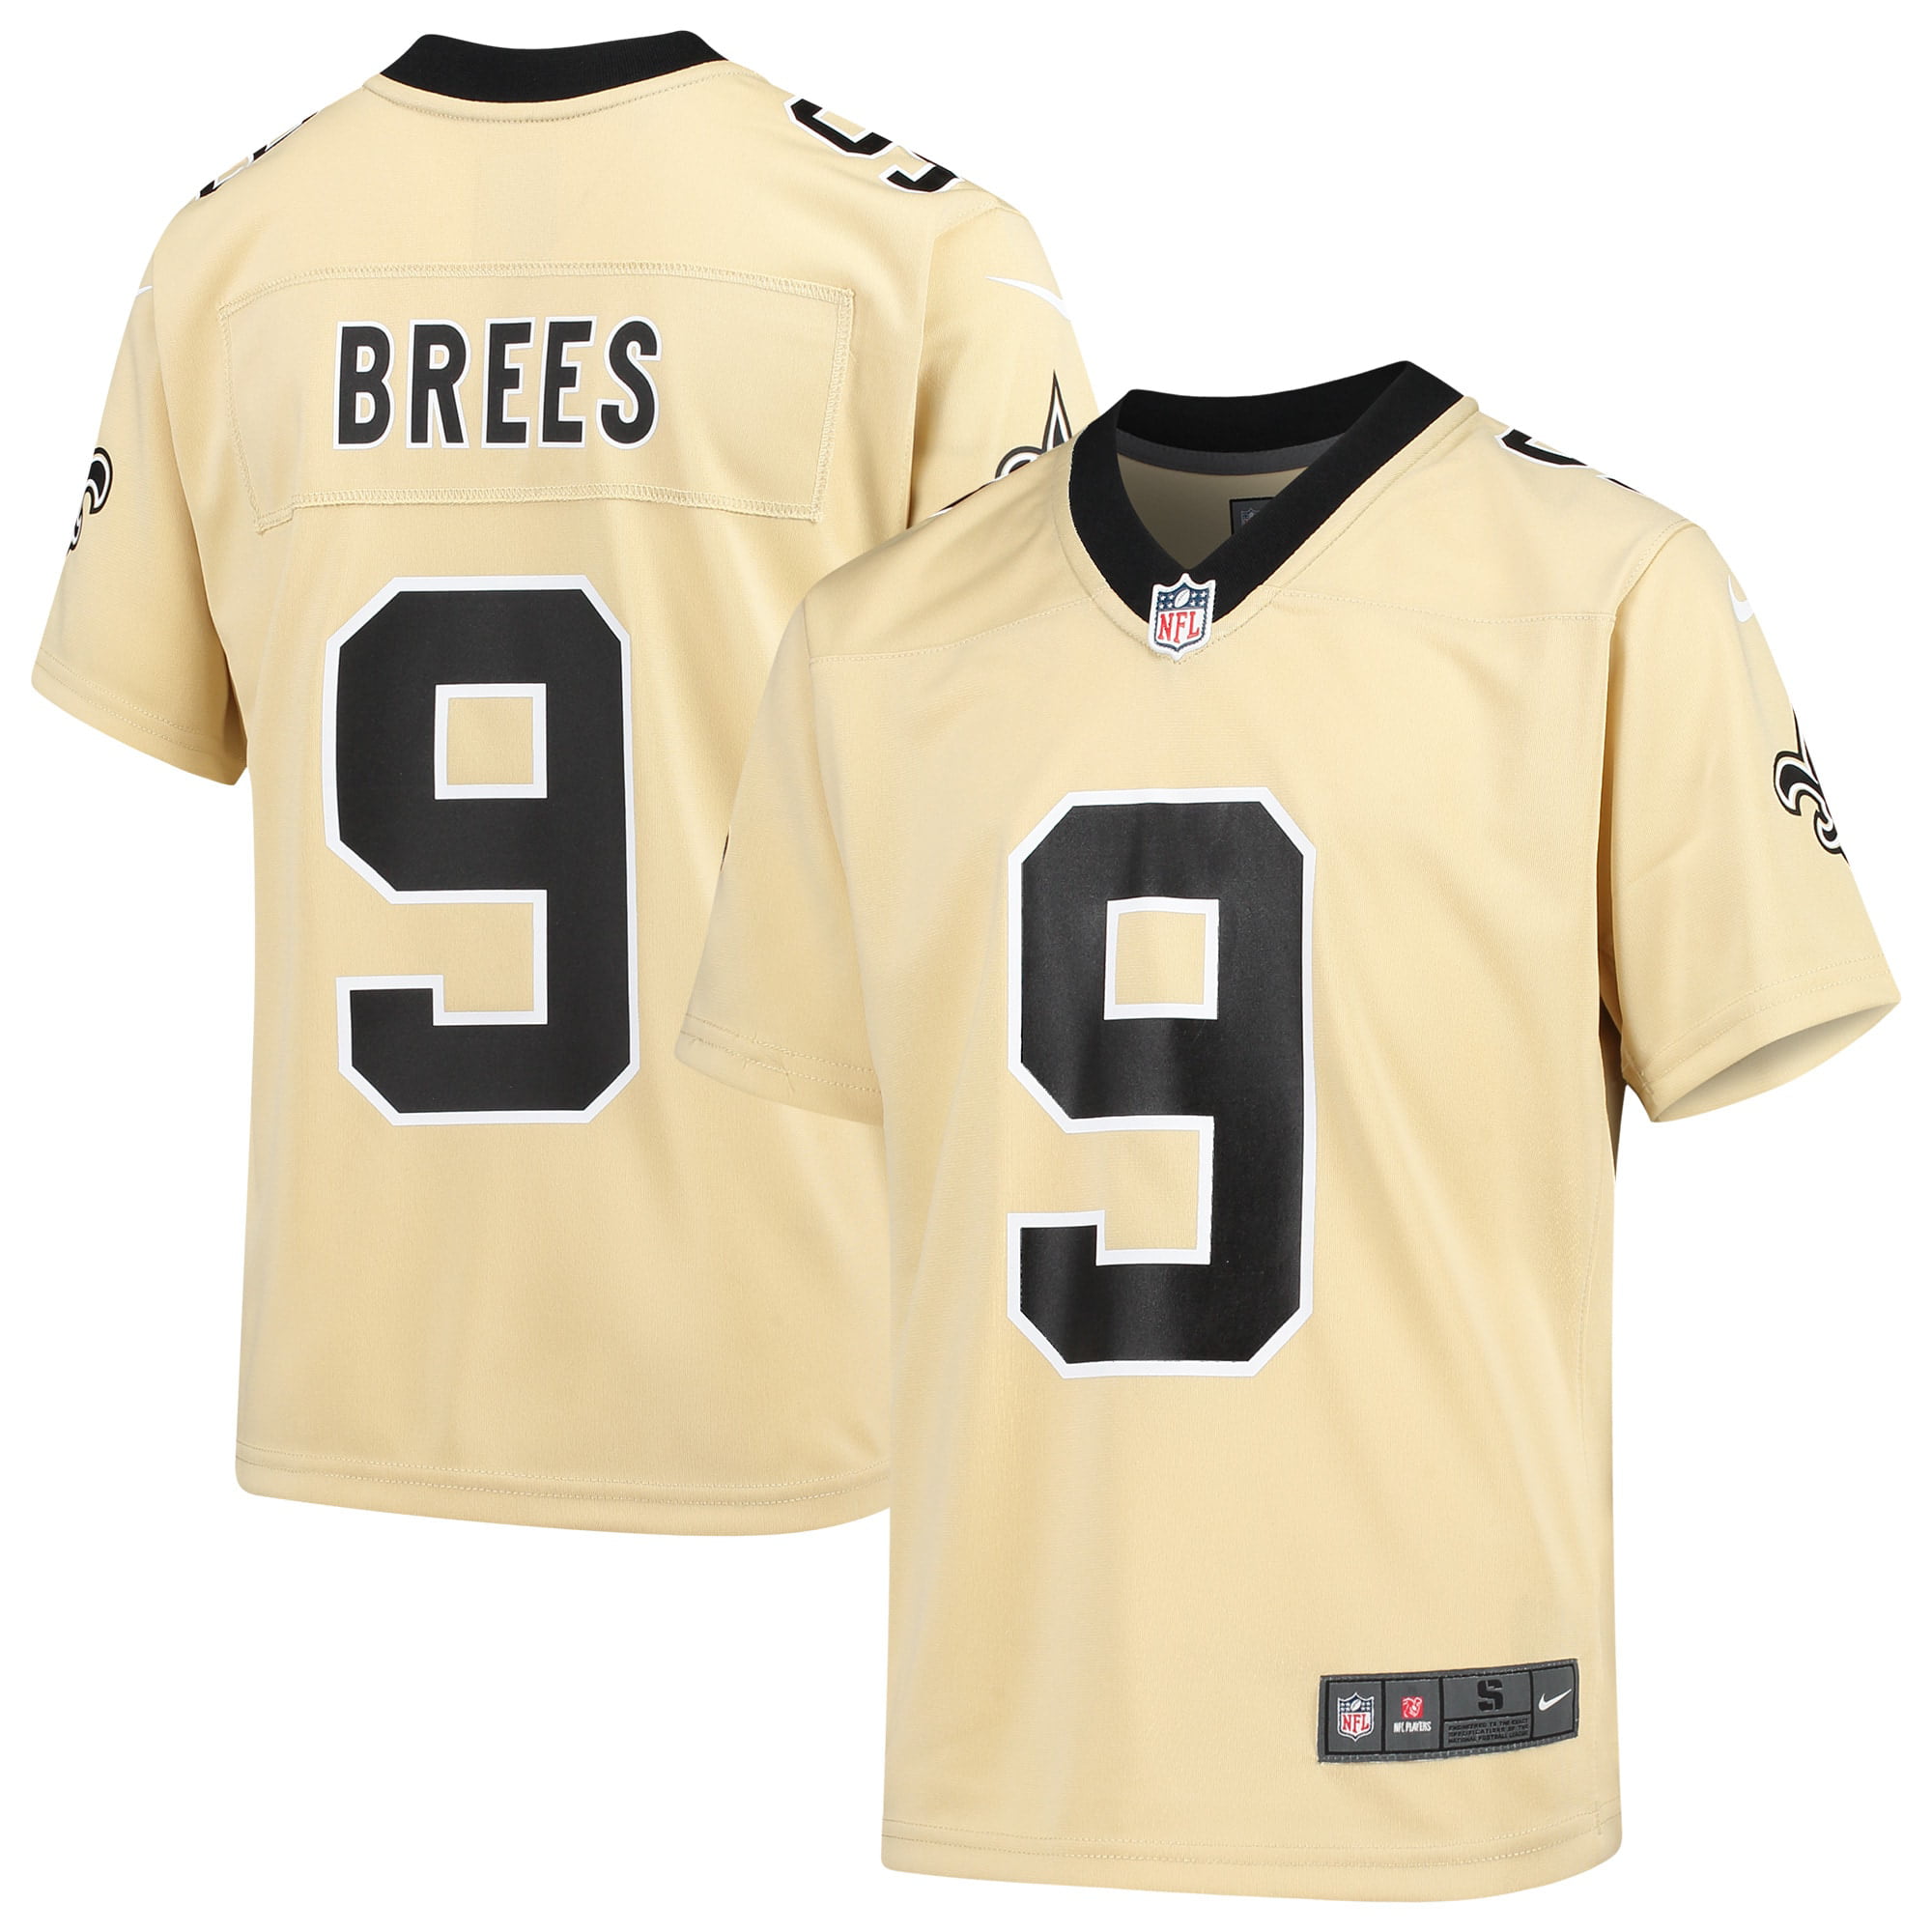 Drew Brees New Orleans Saints Nike Youth Inverted Game Jersey - Gold - Walmart.com - Walmart.com